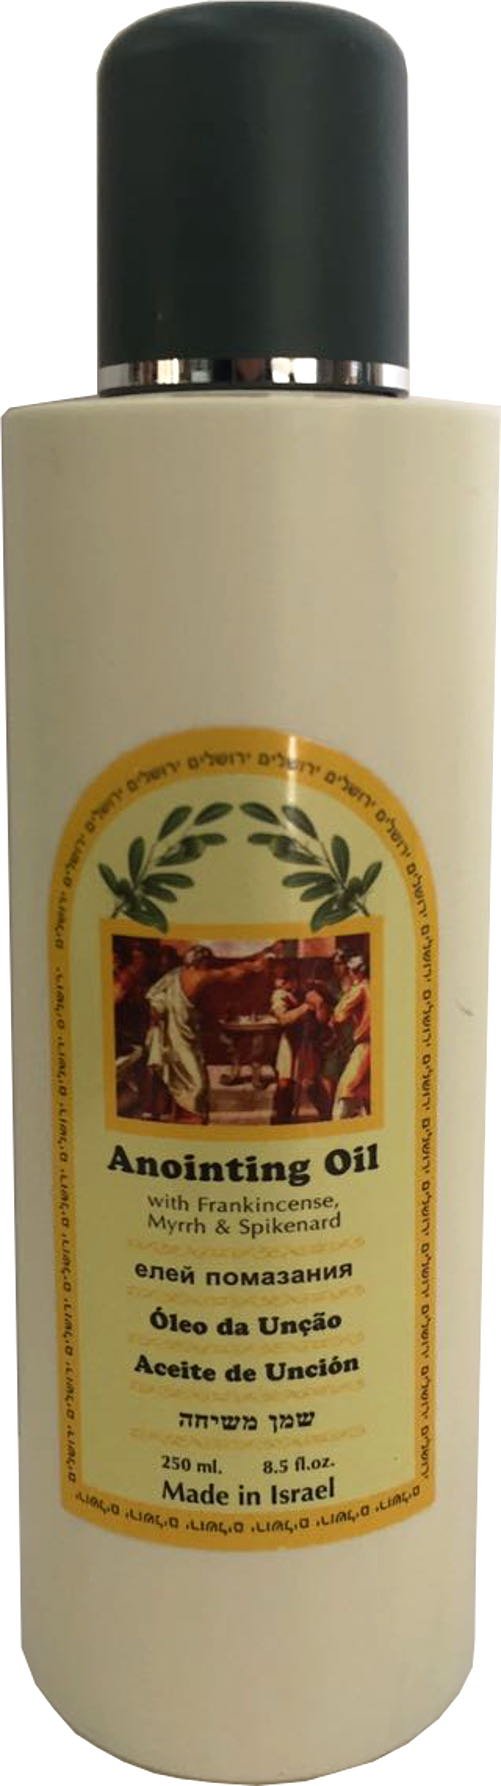 Holy Land Market Myrrh, Frankincense and Spikenard anointing Oil from Ein Gedi large size - Anointing oil - 250 ml (8.5 fl. oz.)